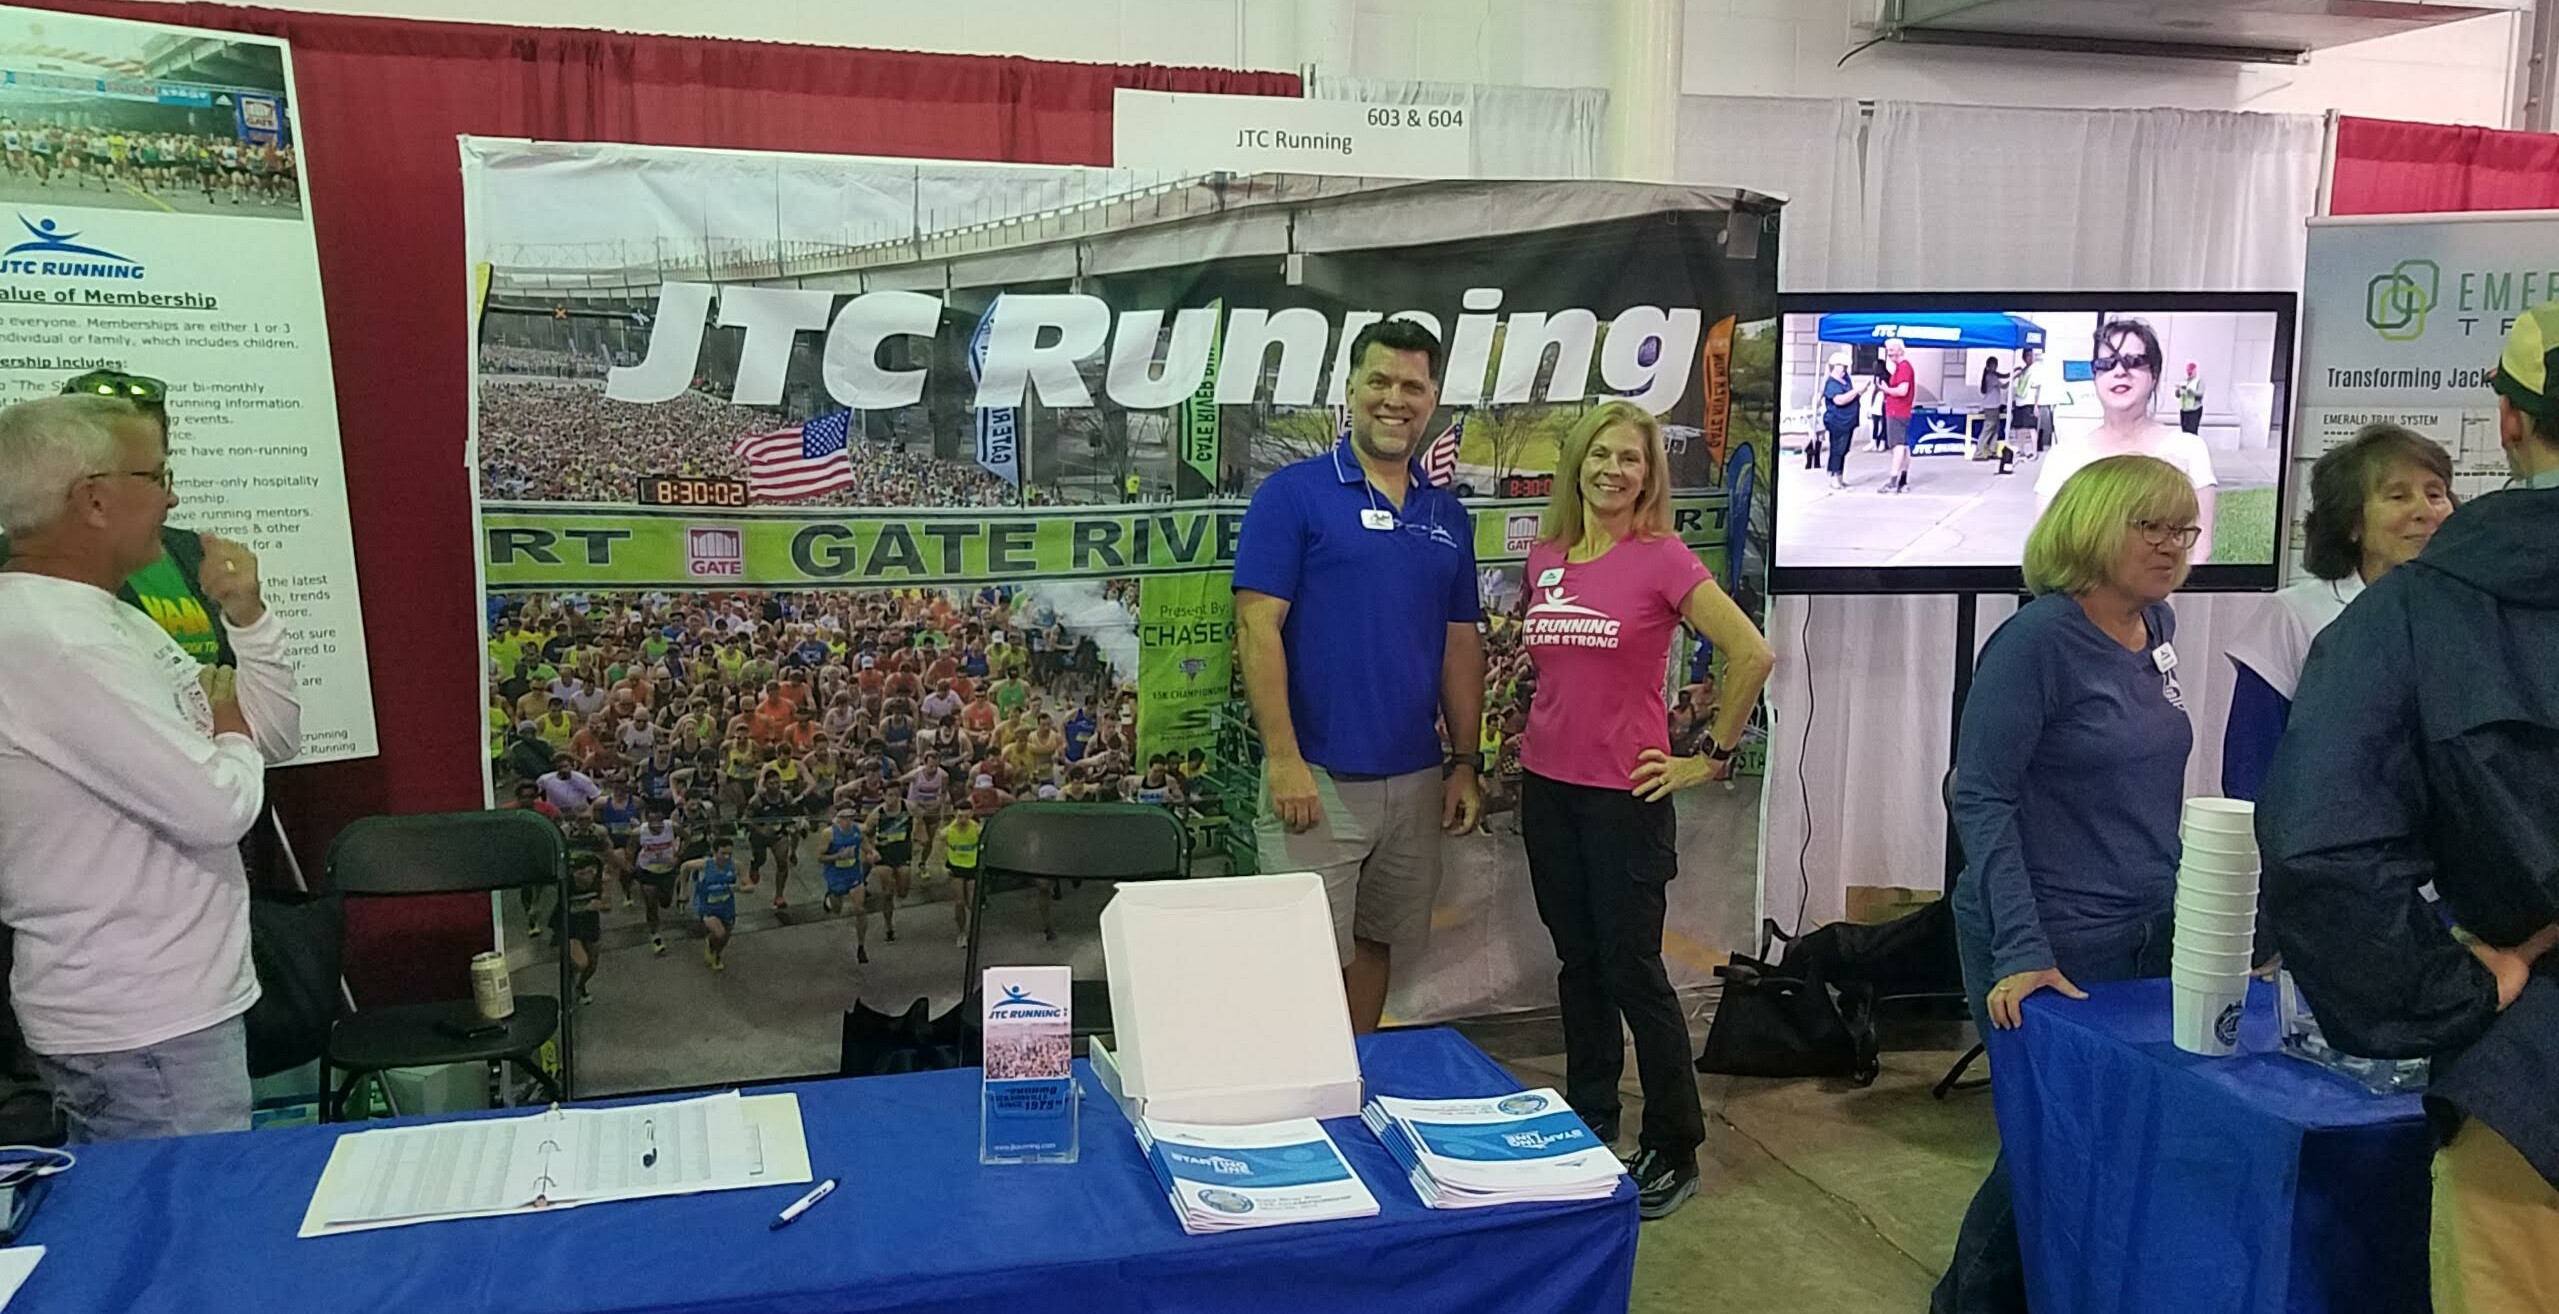 Volunteer for JTC Running’s Gate River Run Expo Booth March 3-4